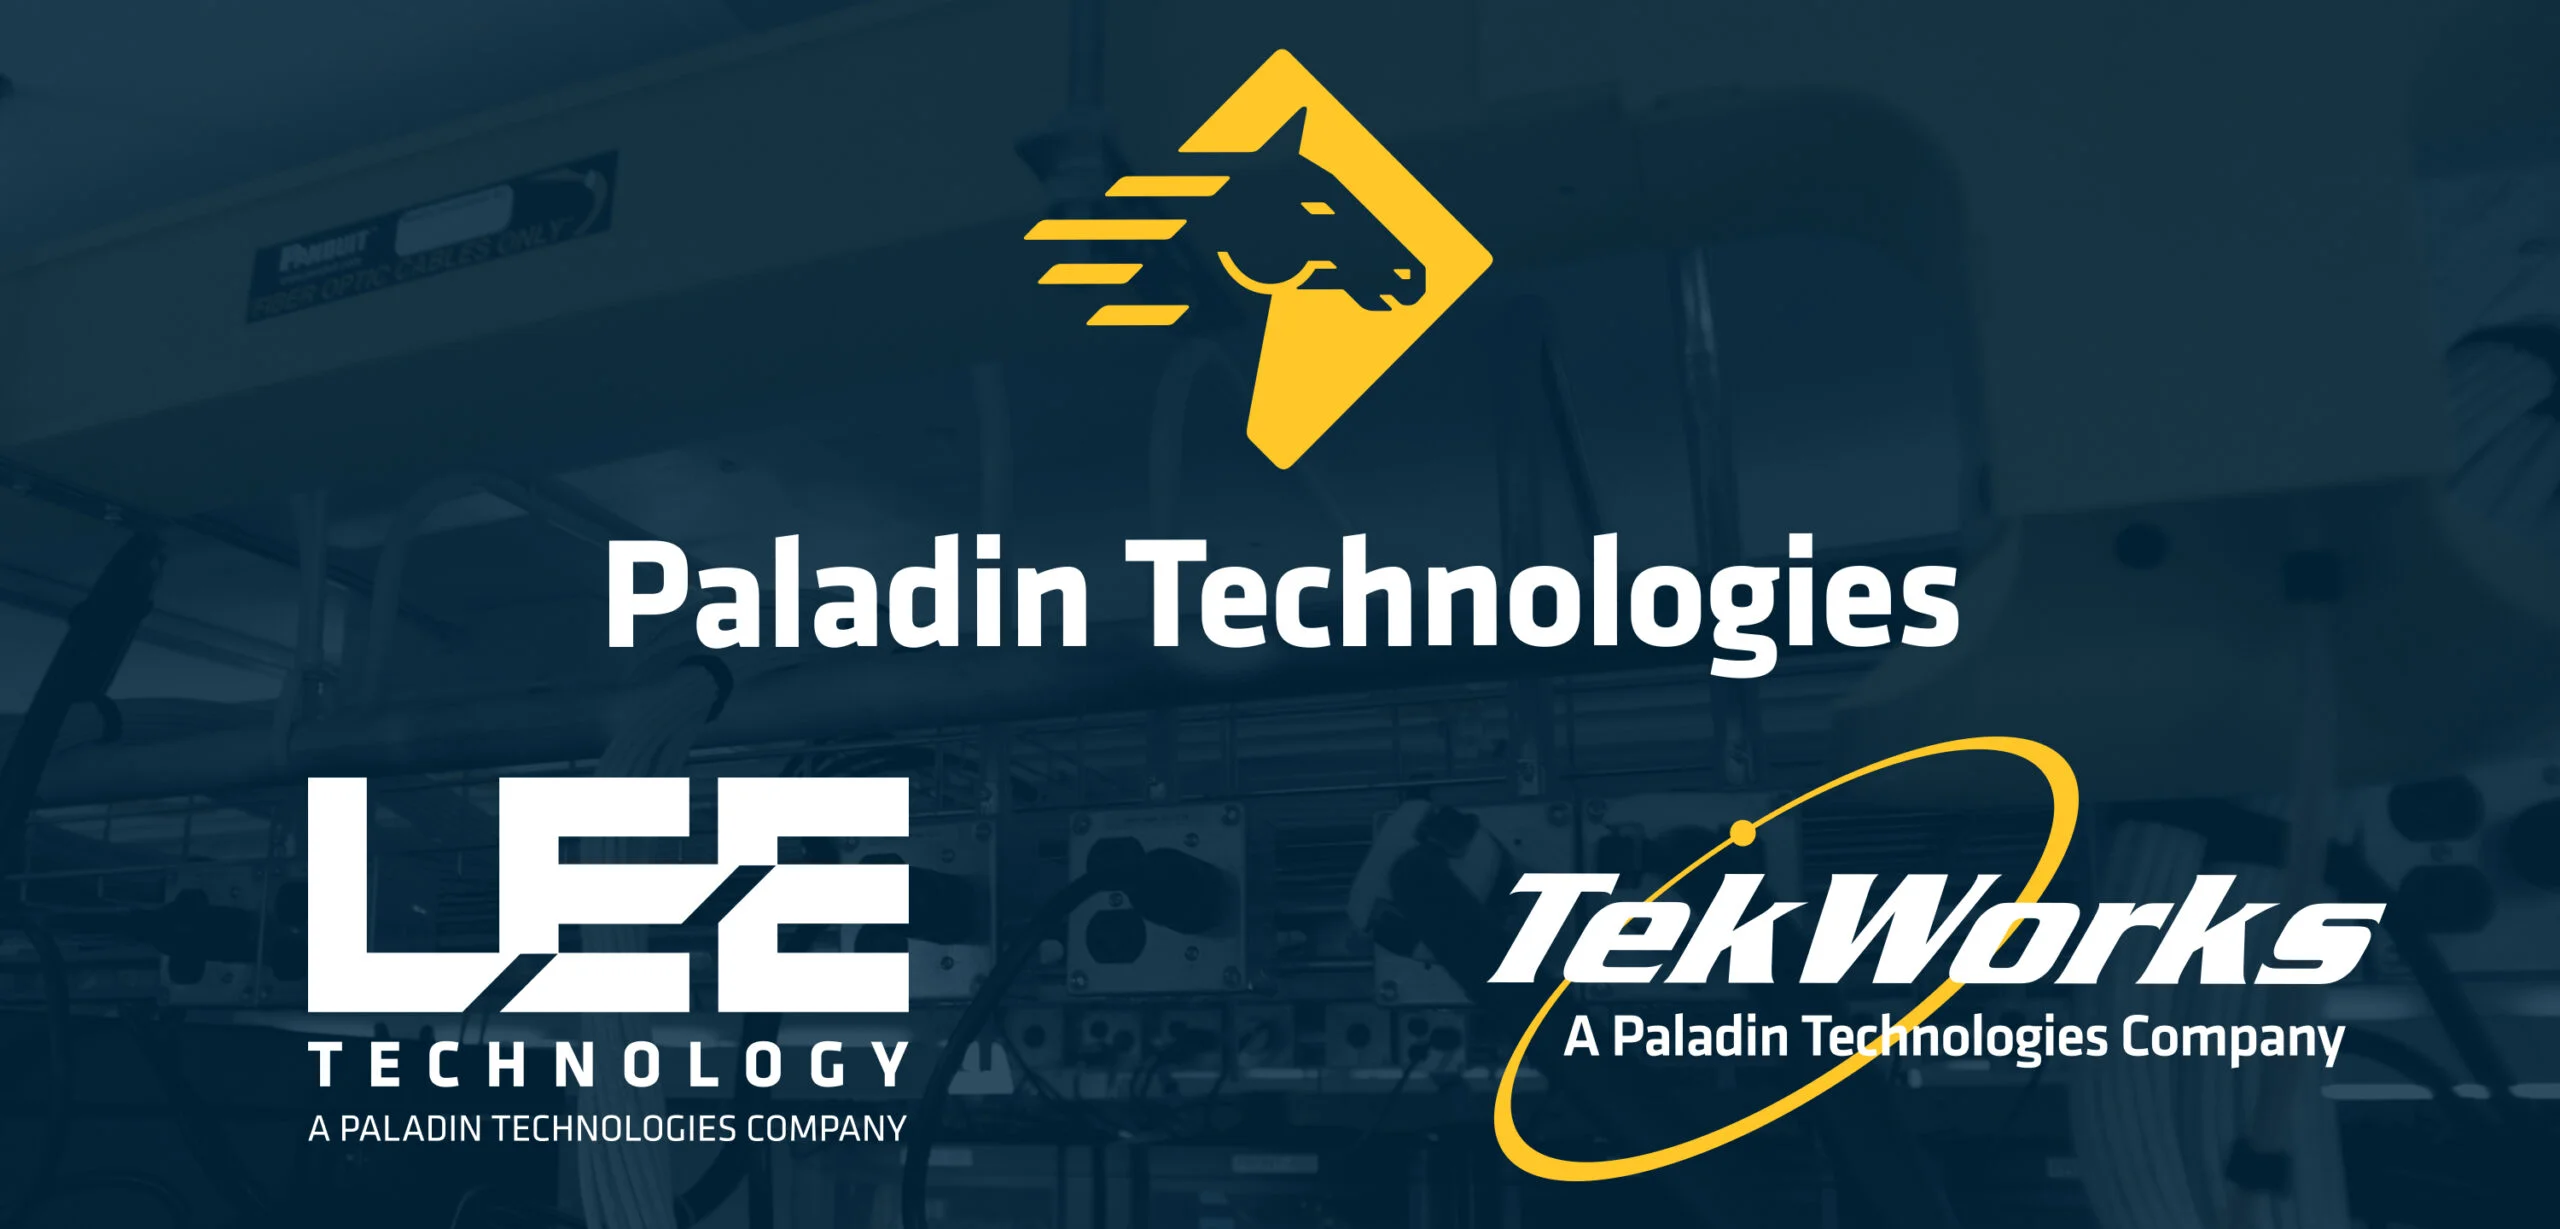 Paladin Technologies acquires Lee Technology and Tek Works 